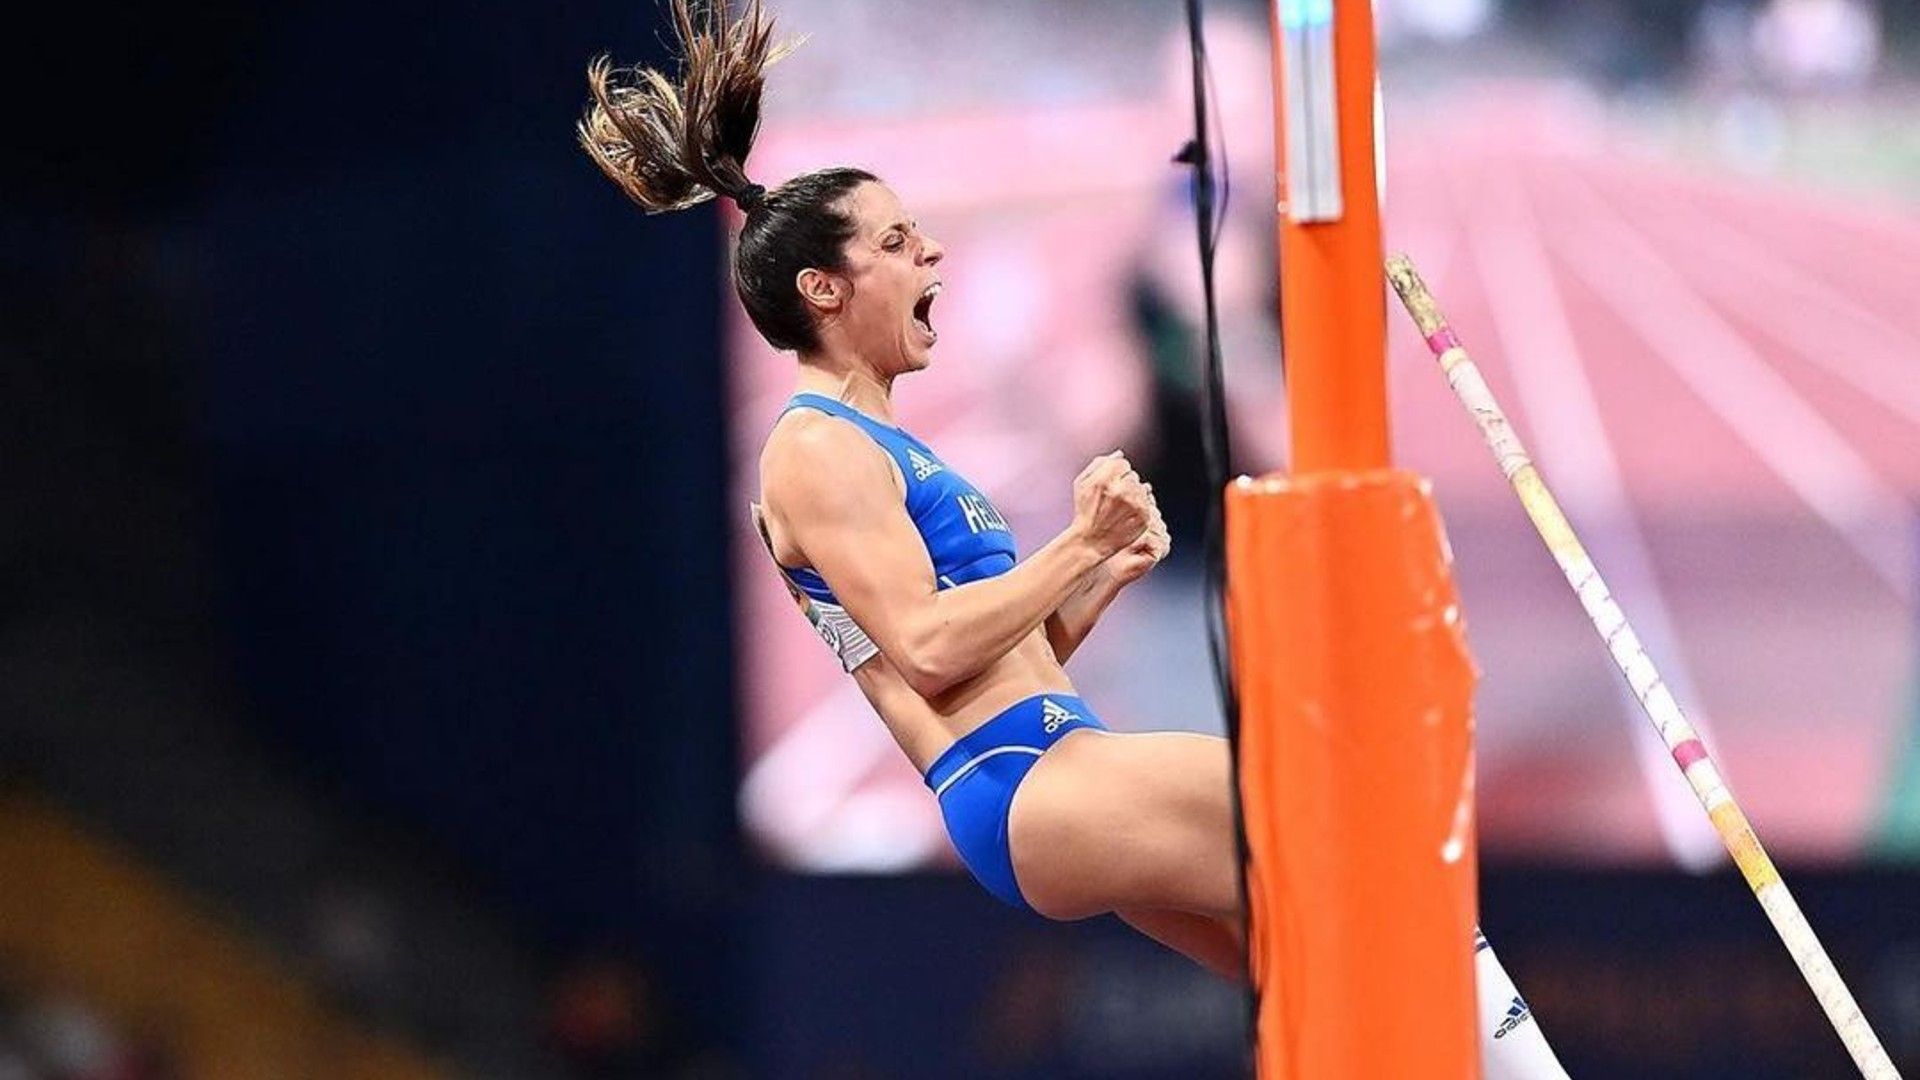 Katerina Stefanidi in action at the European Championships 2022 in Munich (Image Credits - Instagram/ @stefanidi_katerina)